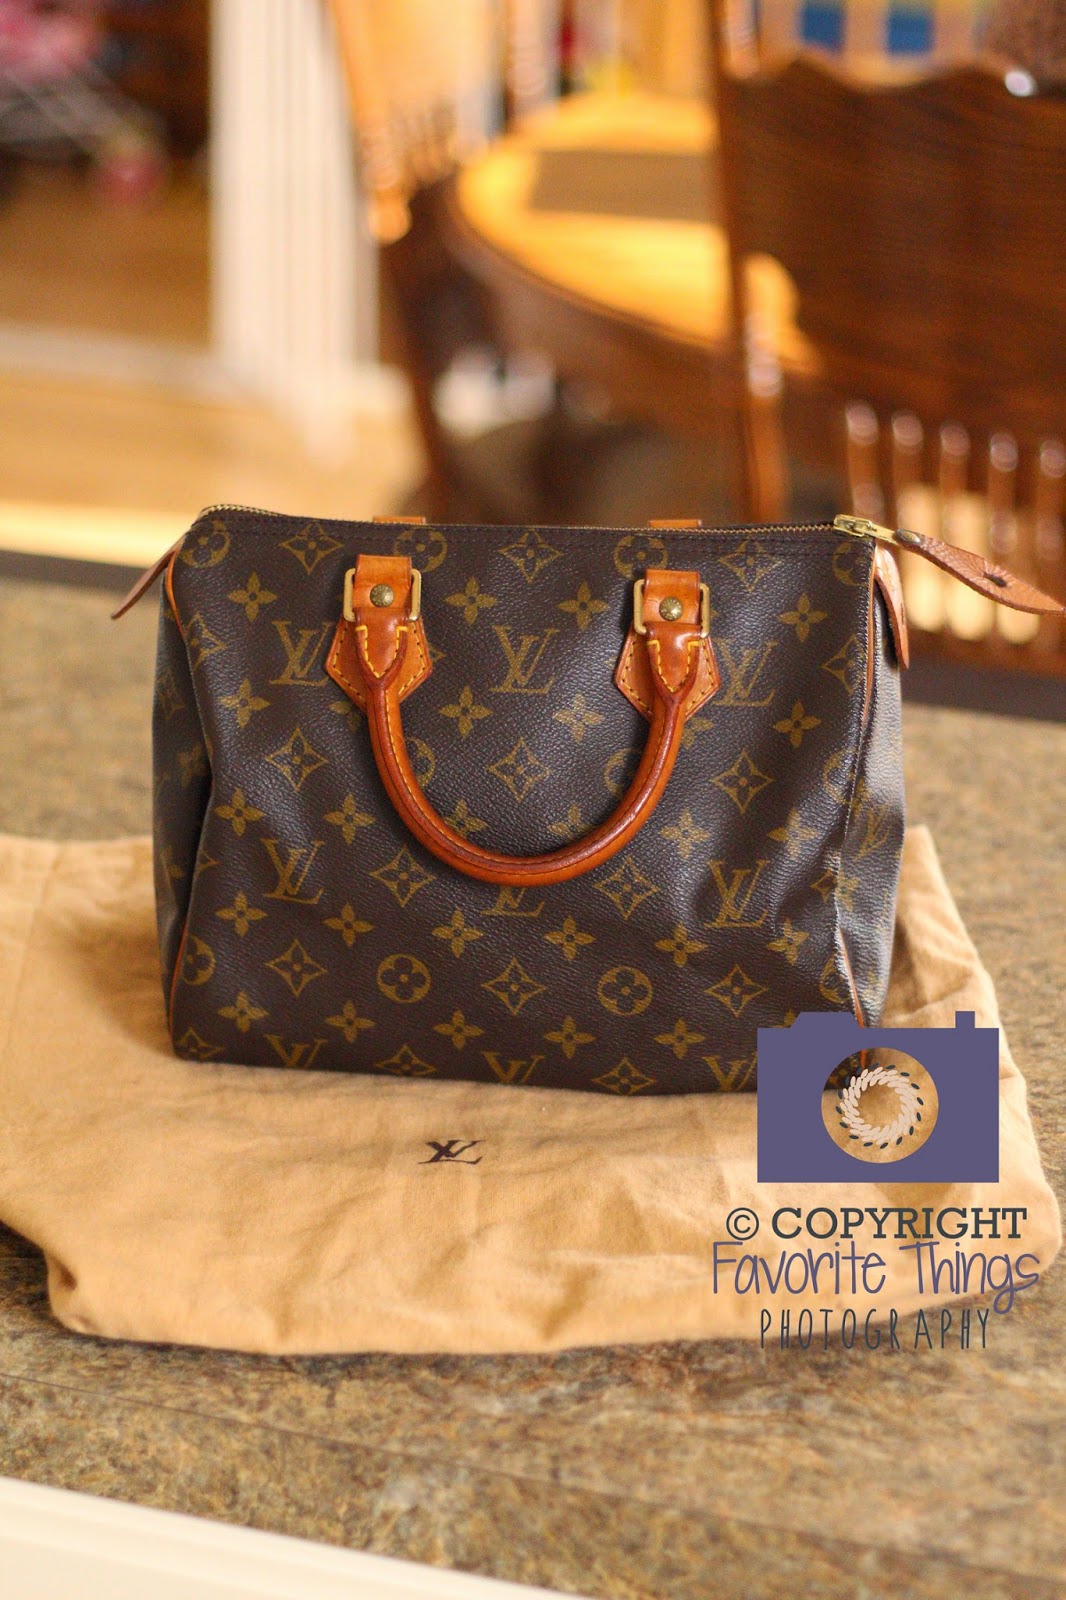 how to clean my louis vuitton bag